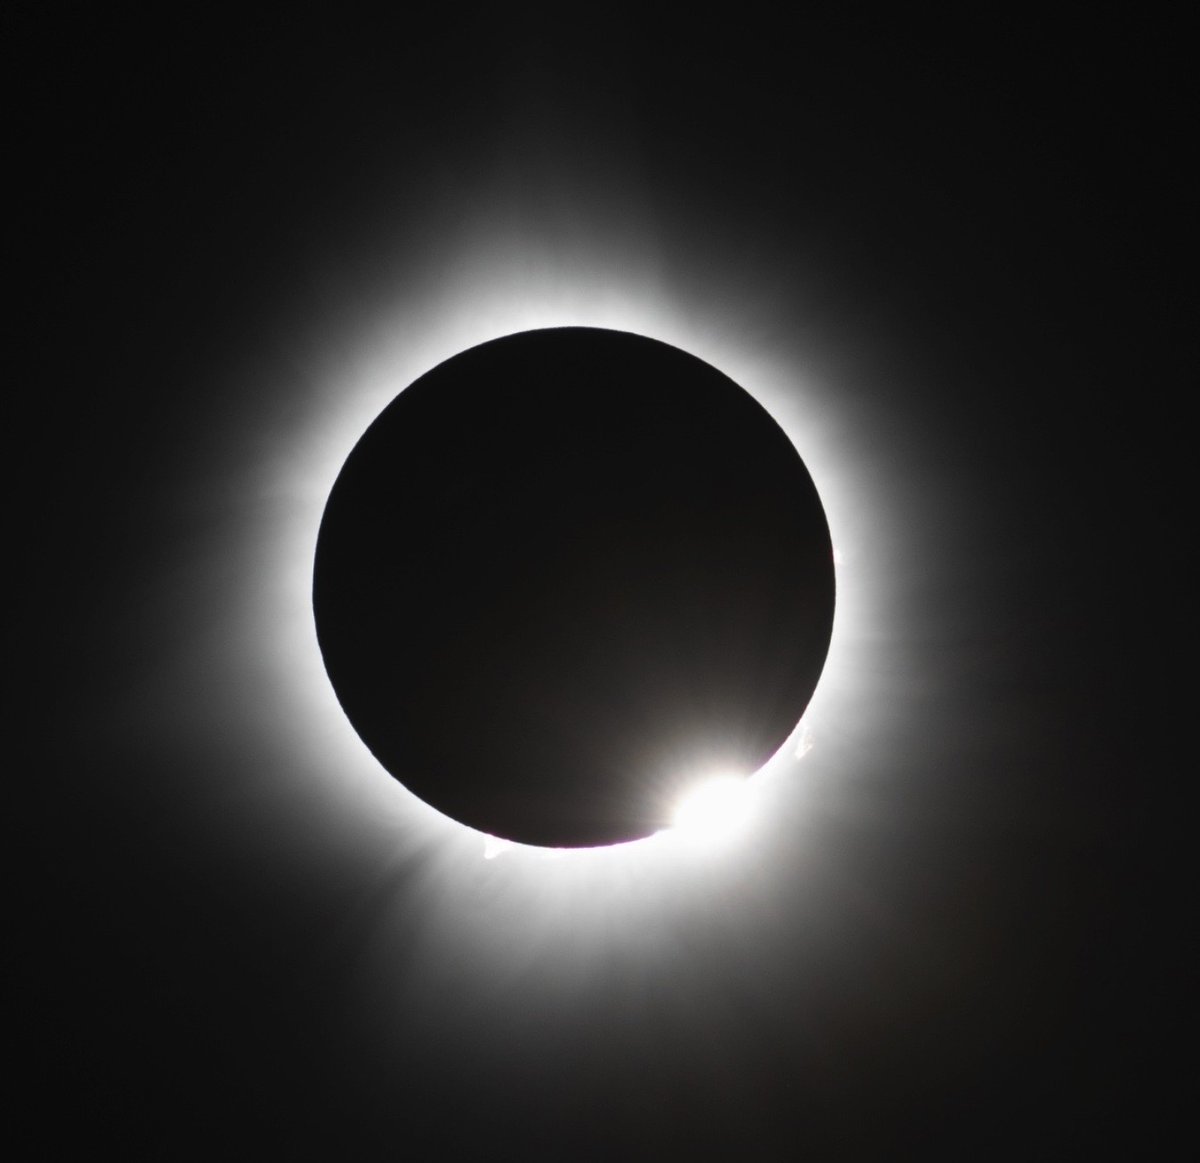 Check it out! READING and MORE ECLIPSE PHOTOGRAPHY by National Parks Arts Foundation Artist in Residence Stan Honda, as he ventures far north to catch the totality in Quebec: stanhonda.com/blog/totality-… ++ Many more stunning Eclipse Photos here: stanhonda.com